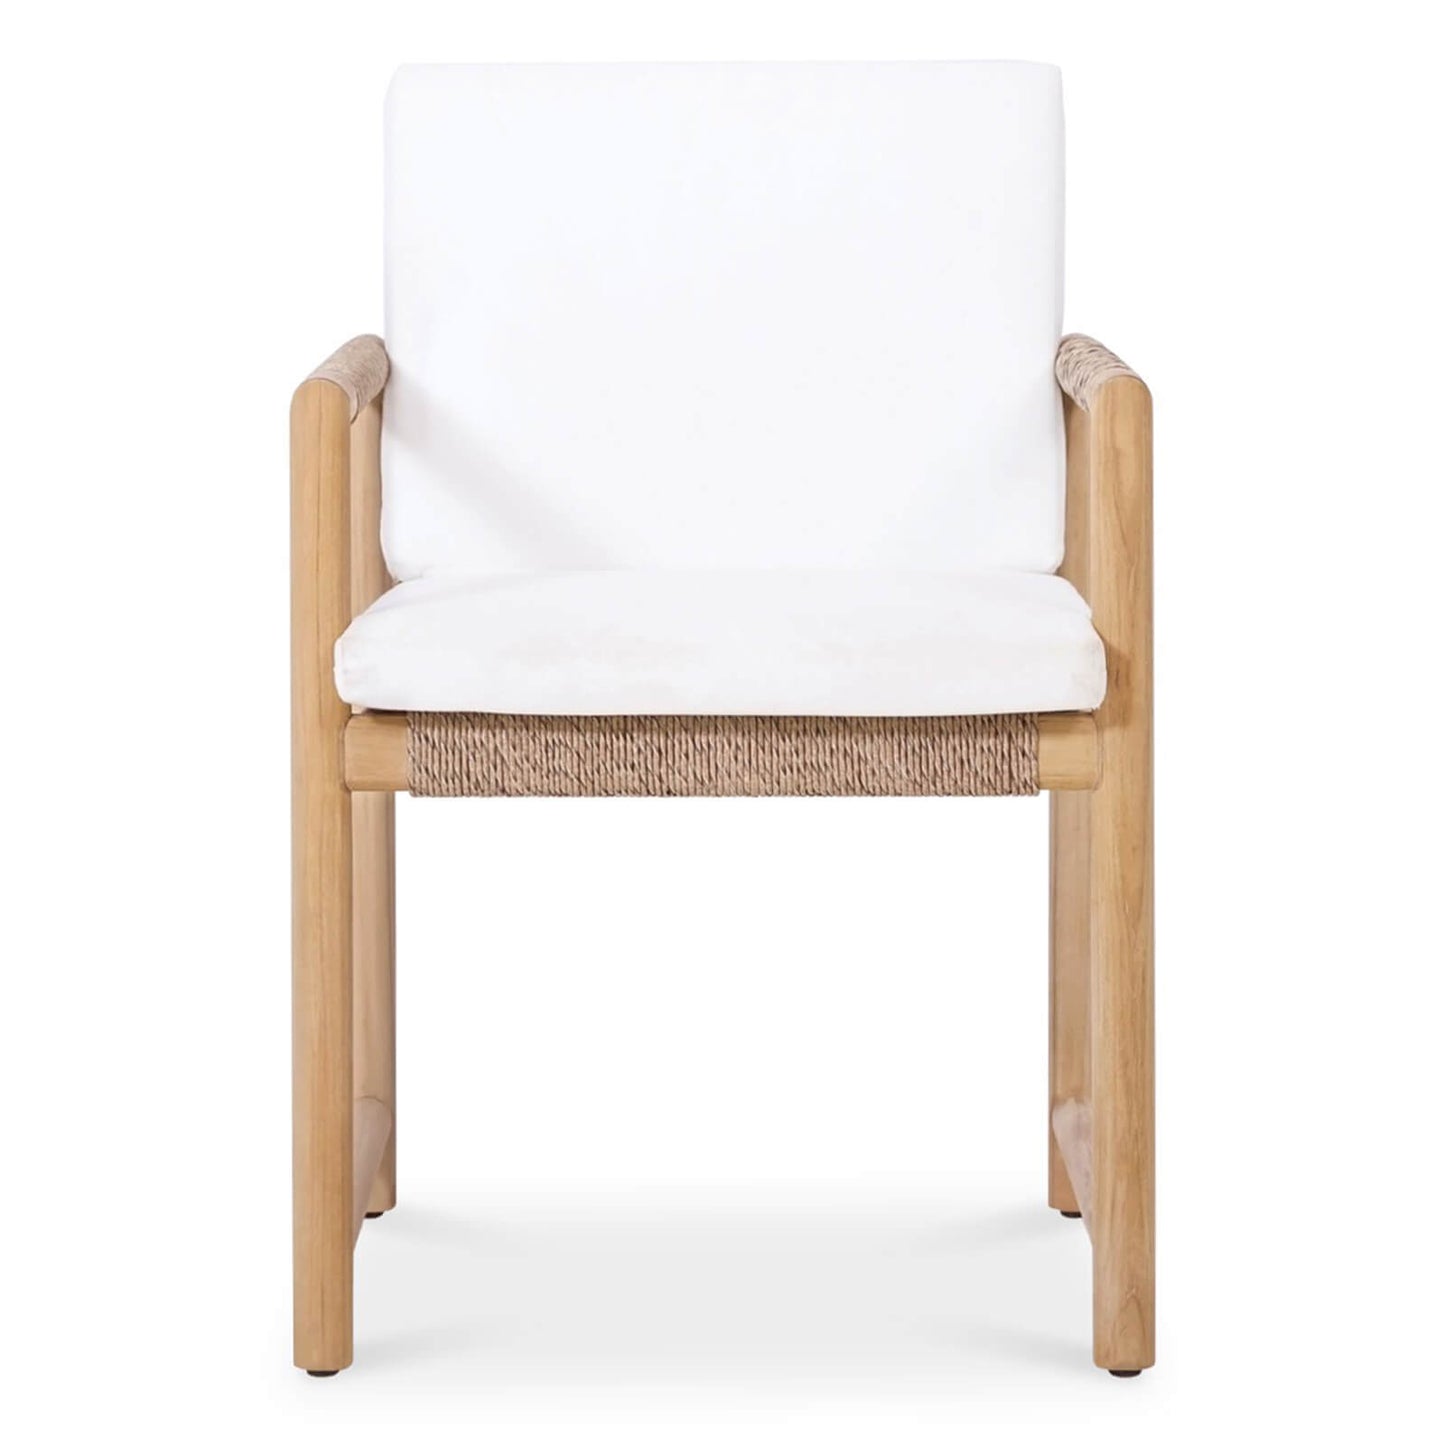 Seacrest | Natural Teak Timber Outdoor Dining Chair With Arms